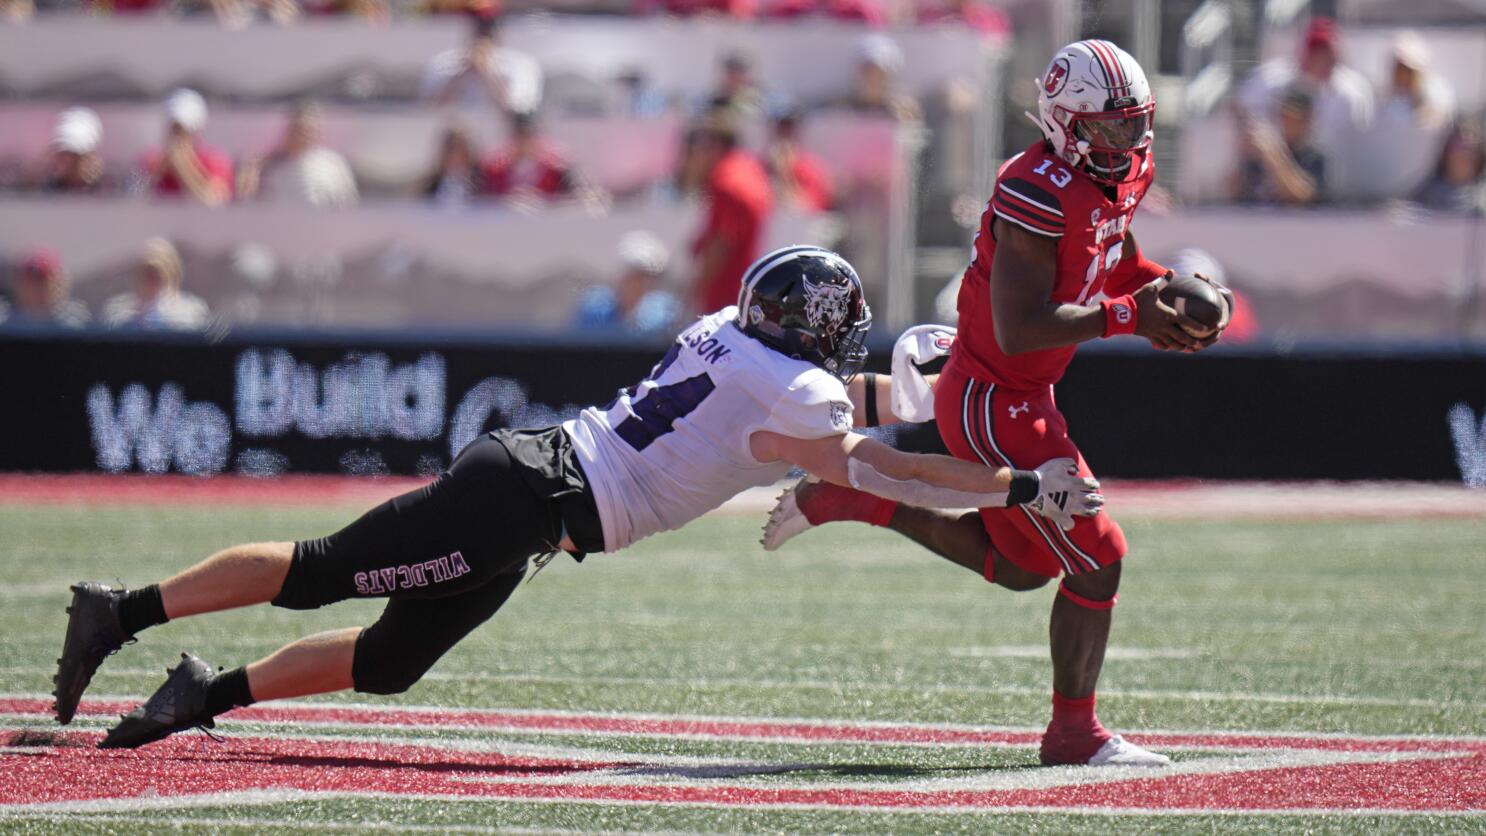 Nate Johnson leads No. 12 Utah over Weber State 31-7 in first